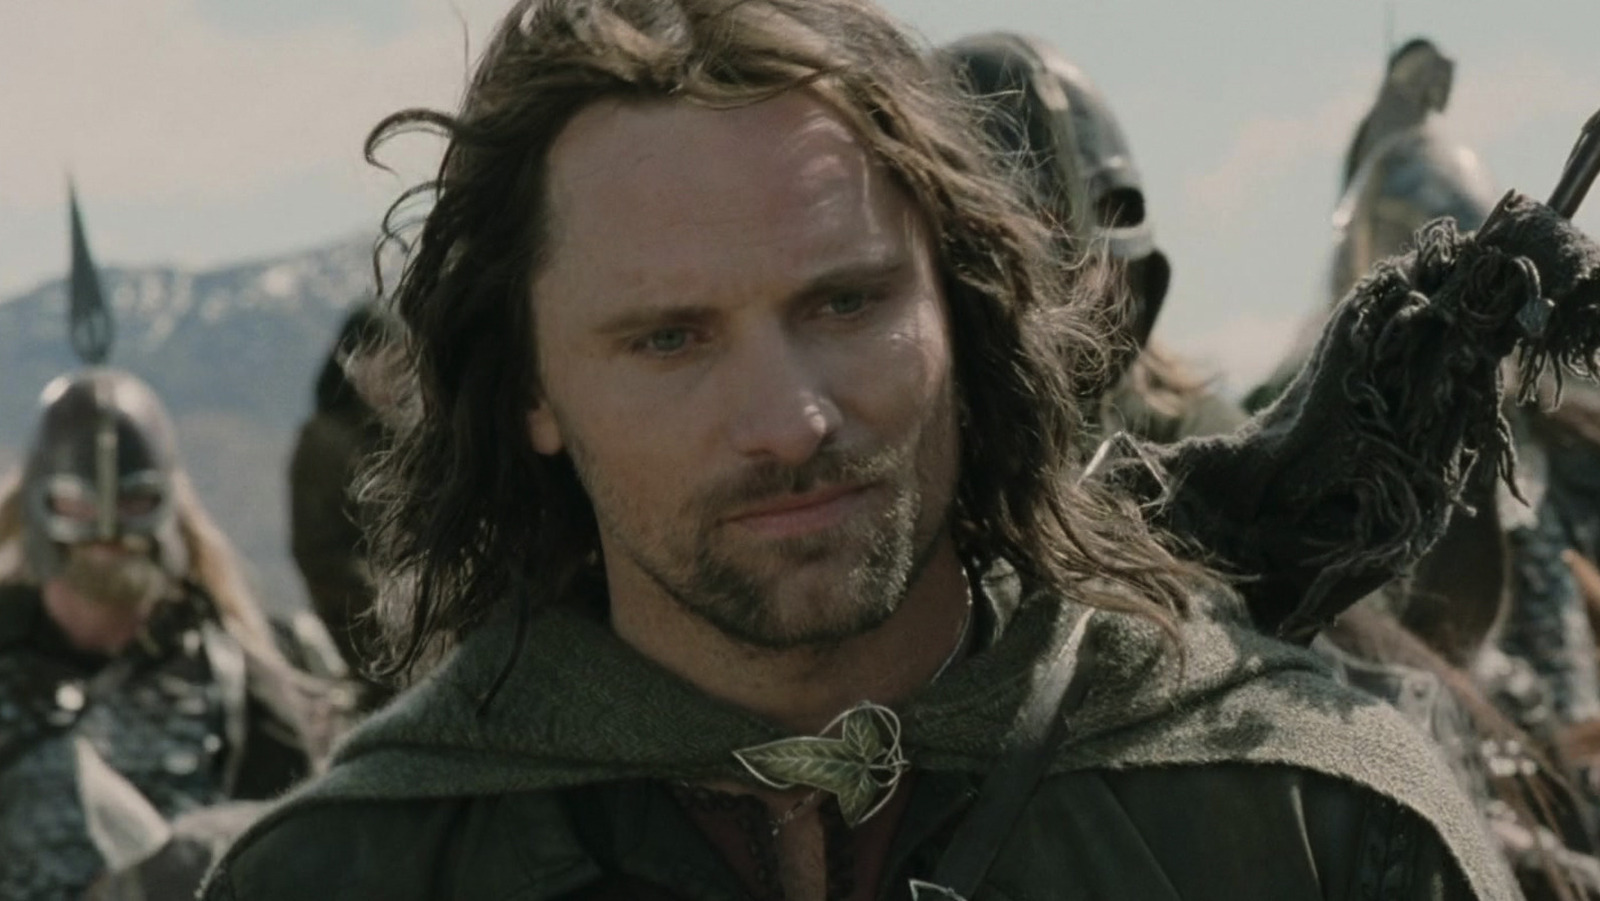 Lord of the Rings The War of Rohirrim release date, cast and more